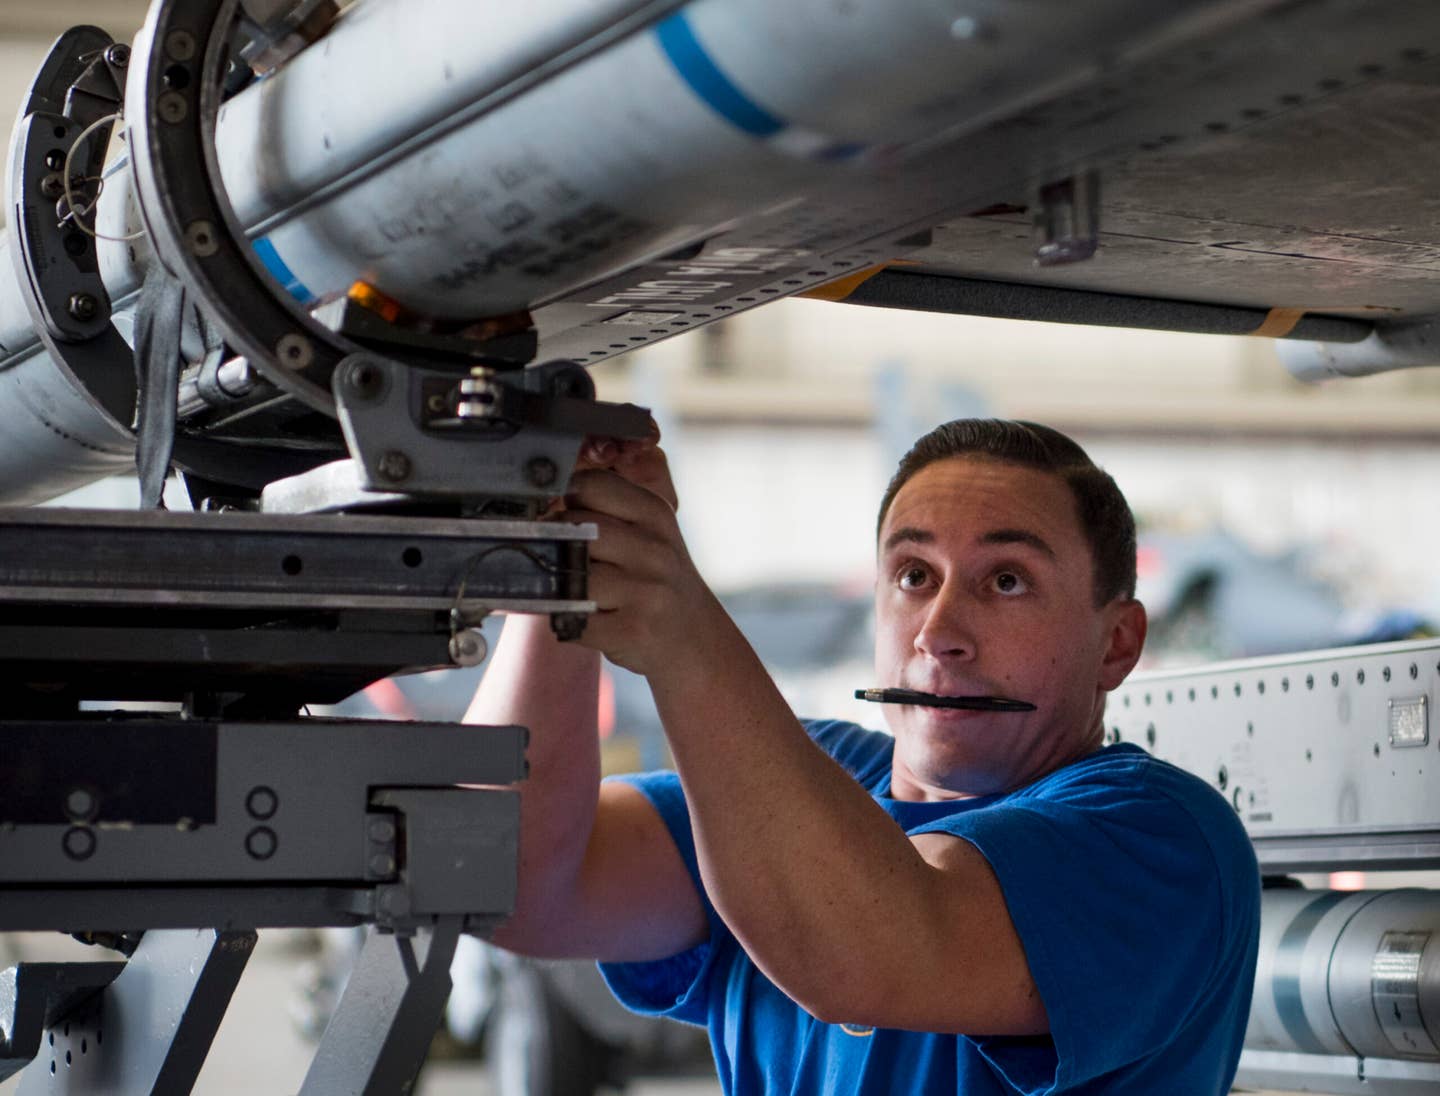 Staff Sgt. Trey Riley, 96th Aircraft Maintenance Squadron Blue team, secures an AIM-120 missile onto an F-16 April 13 at Eglin Air Force Base, Fla. The Blue team battled the Red AMU team for weapons loadcrew supremacy during the quarterly competition. The Red team claimed victory this quarter. (U.S. Air Force photo/Samuel King Jr.)